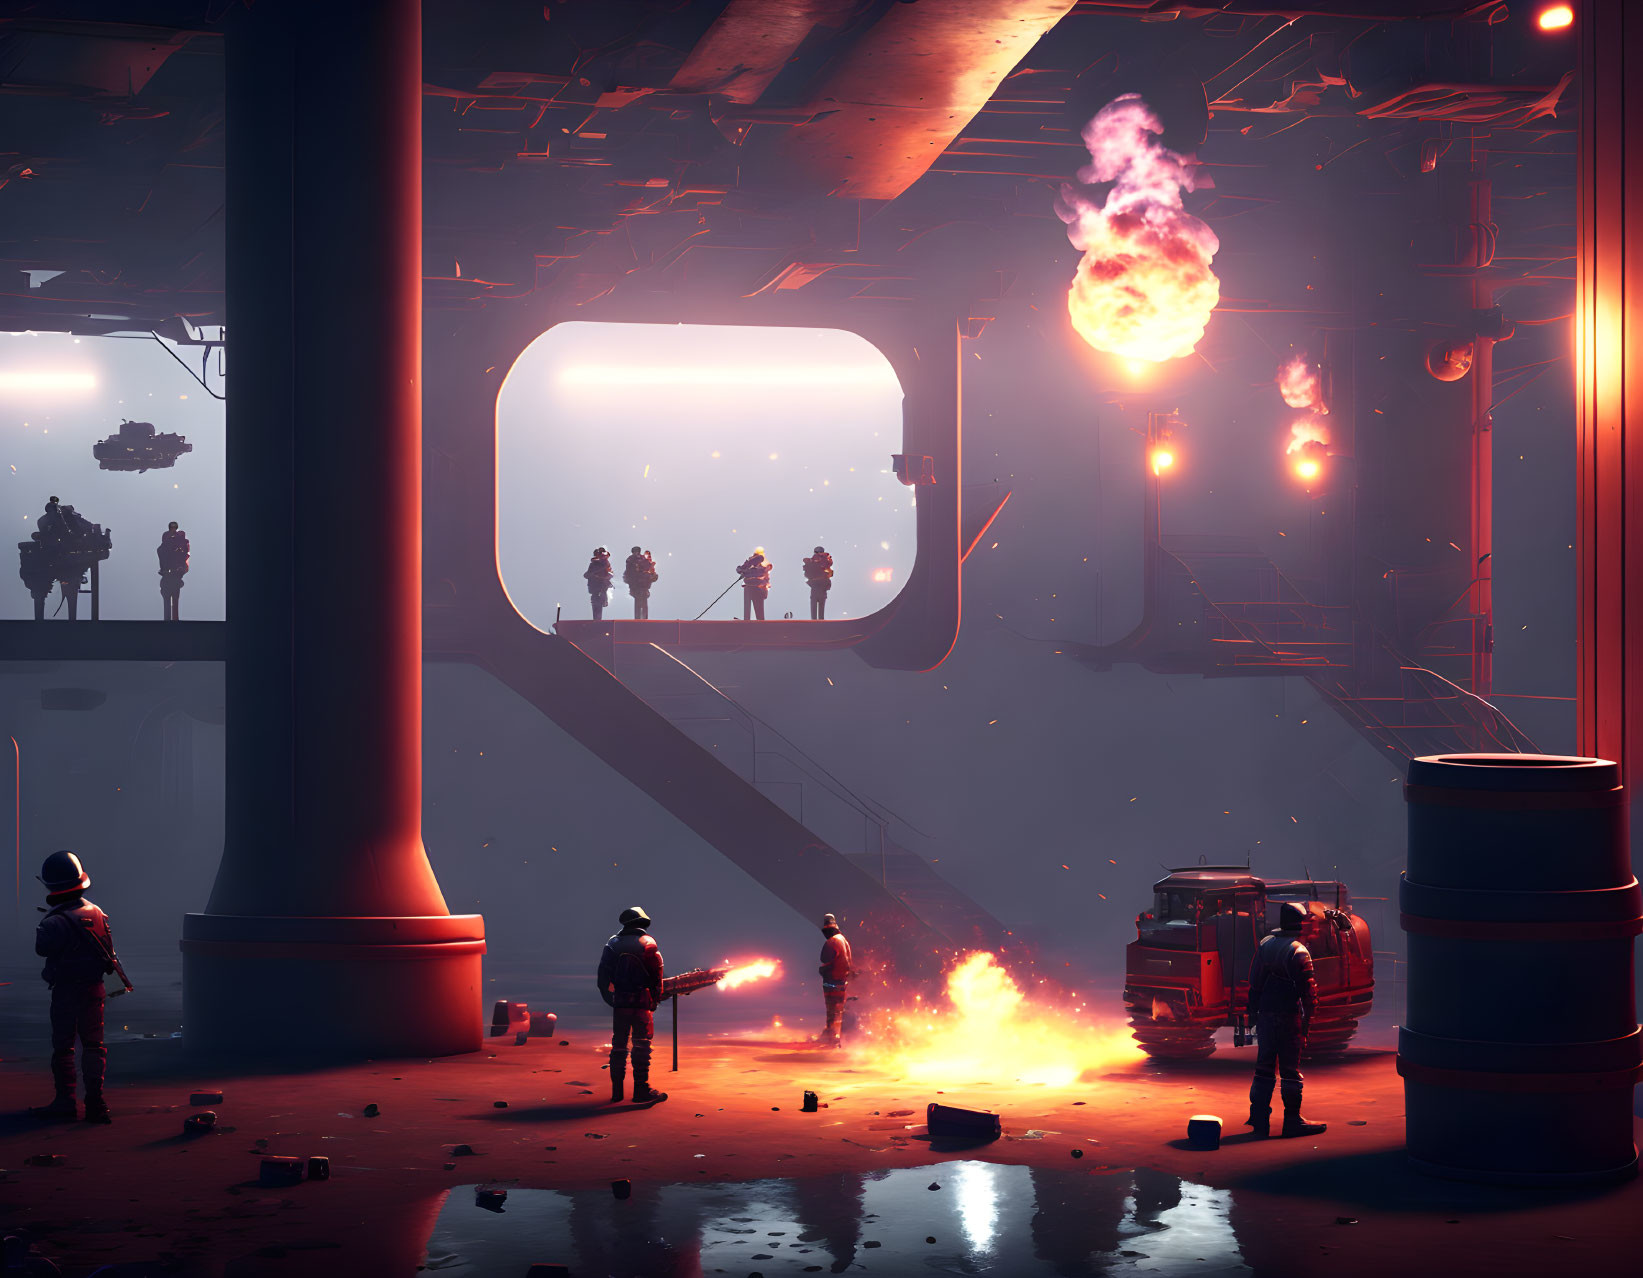 Armed figures, hovering vehicle, fiery explosions in futuristic industrial setting